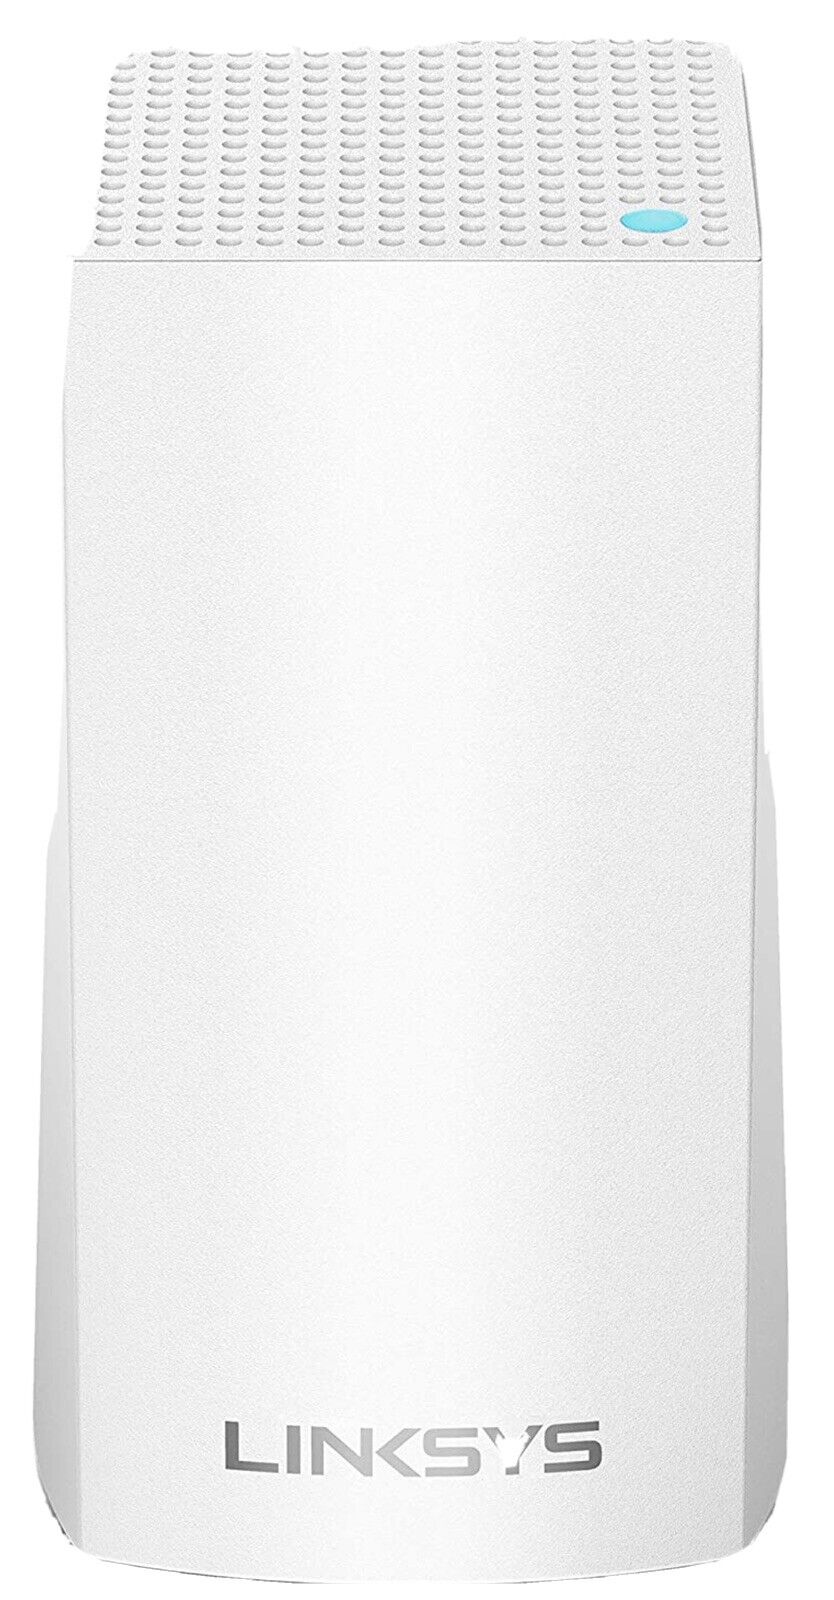 Linksys WHW0101 Velop Dual-Band Home Wi-Fi System 1,500 sq ft Wireless Router